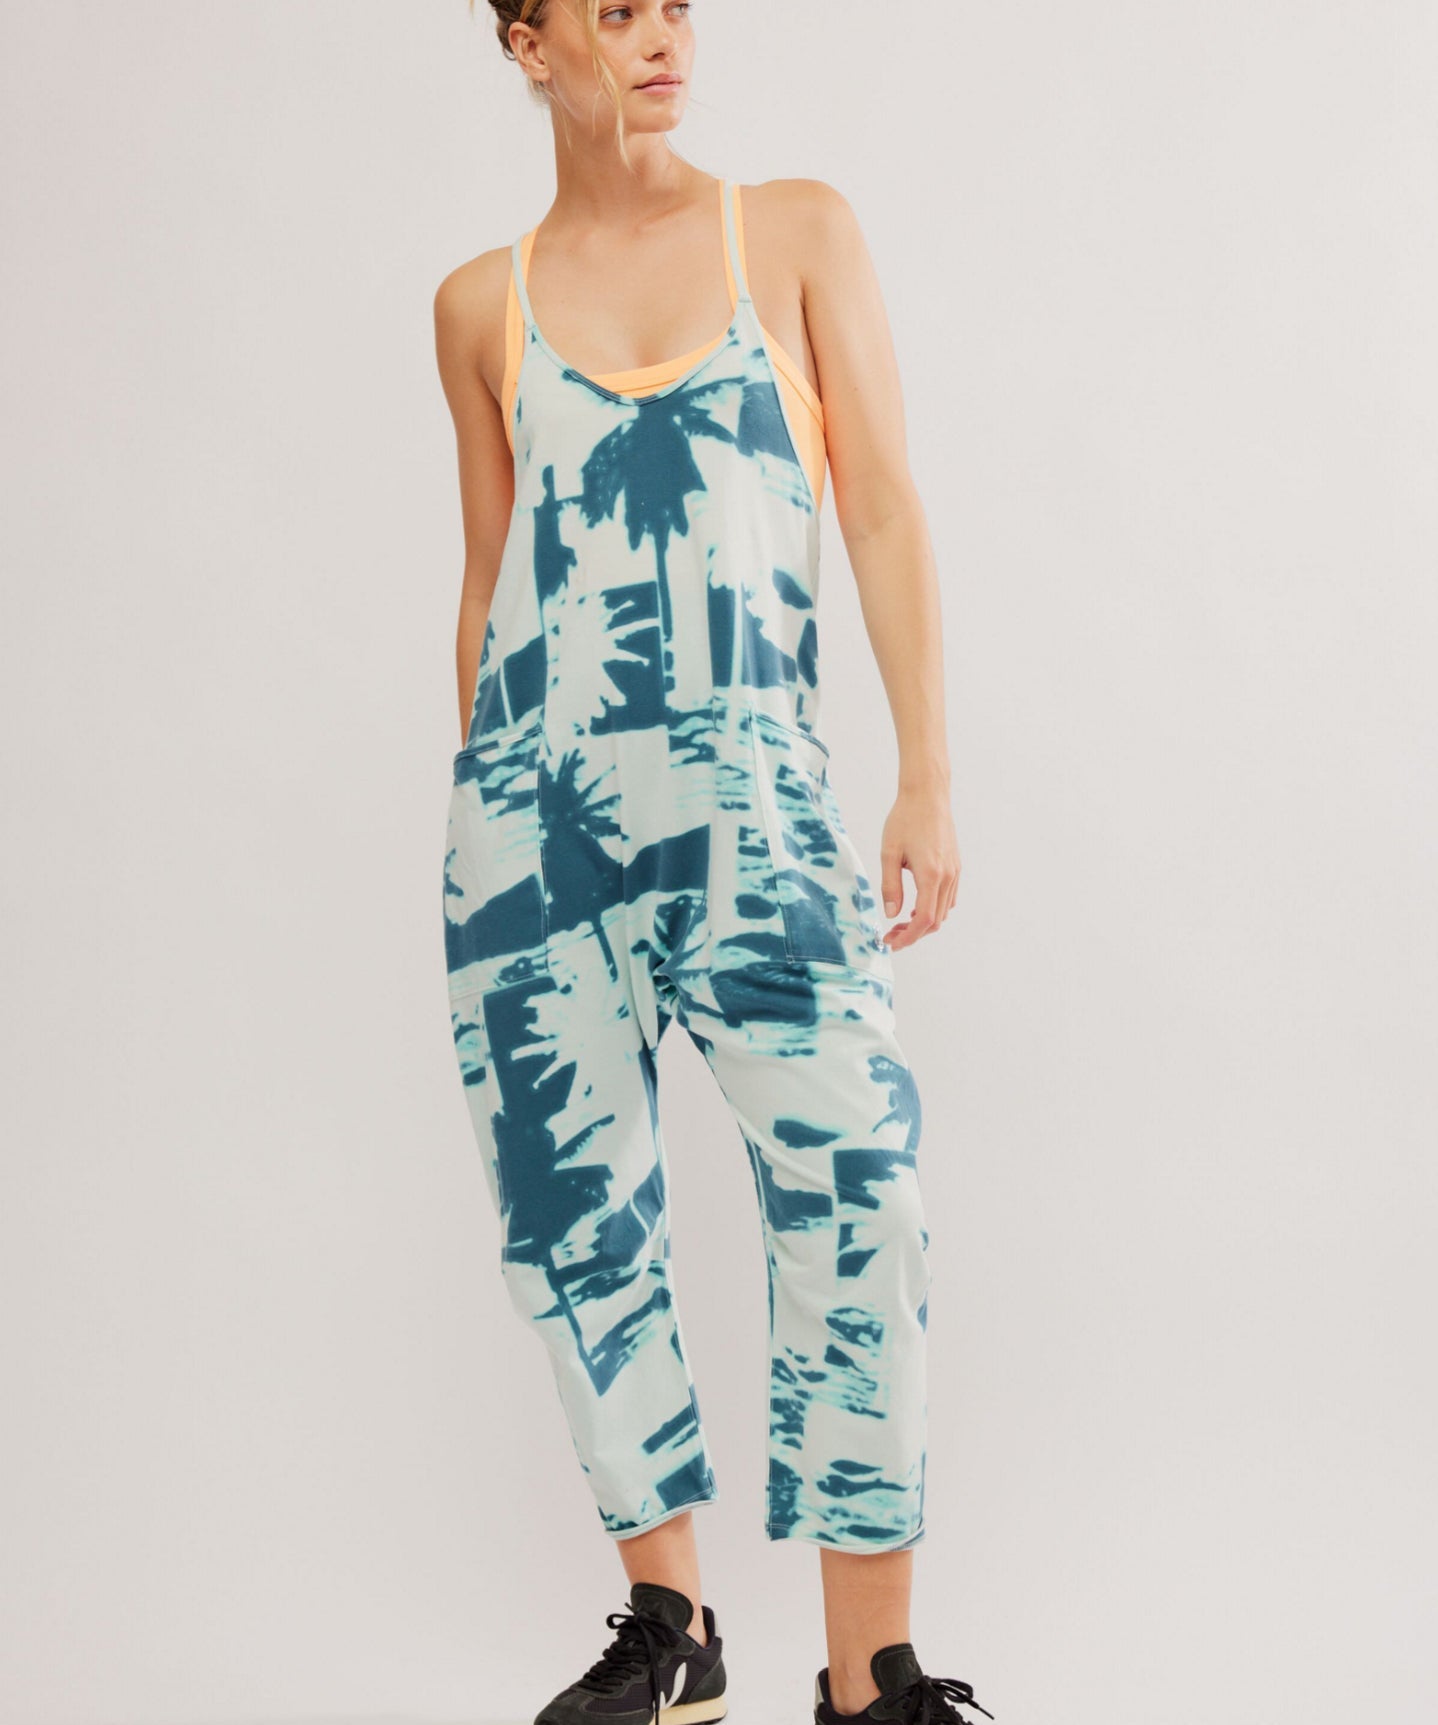 Hot Shot Printed Onesie by Free People - palm beach green - Blue Sky Fashions & Lingerie